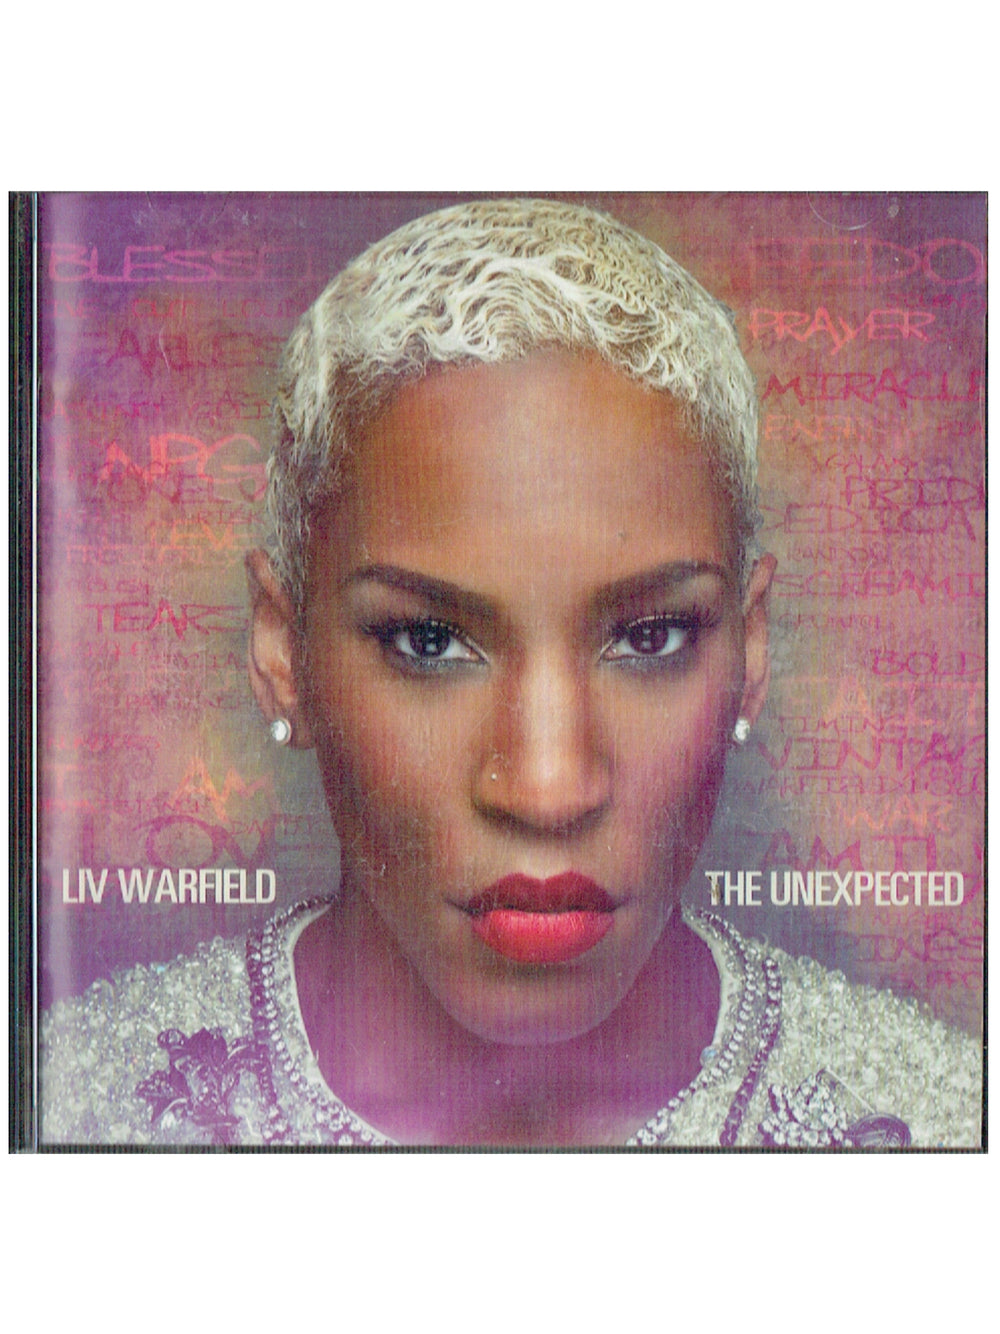 Prince – Liv Warfield The Unexpected CD Album 2014 Release Executive Producer Prince SW